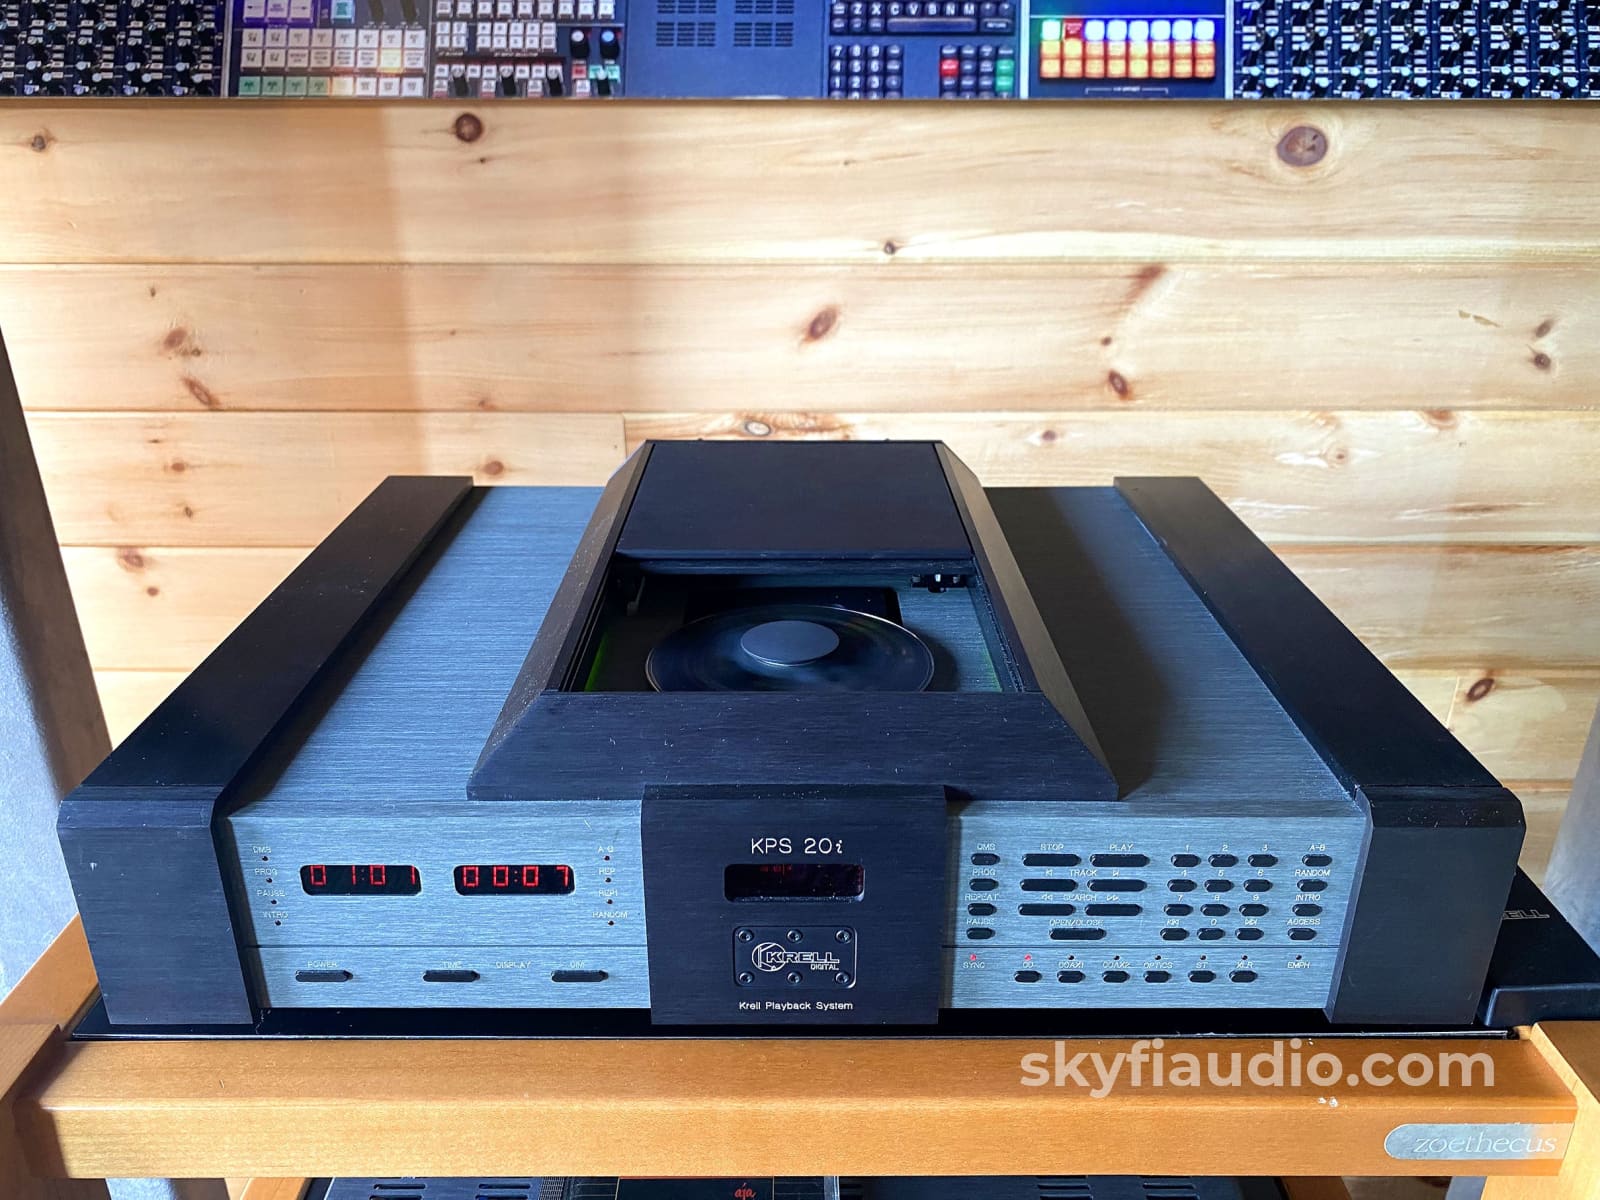 Krell Kps-20I Cd Player Complete And Perfect (Krell Playback System) + Digital